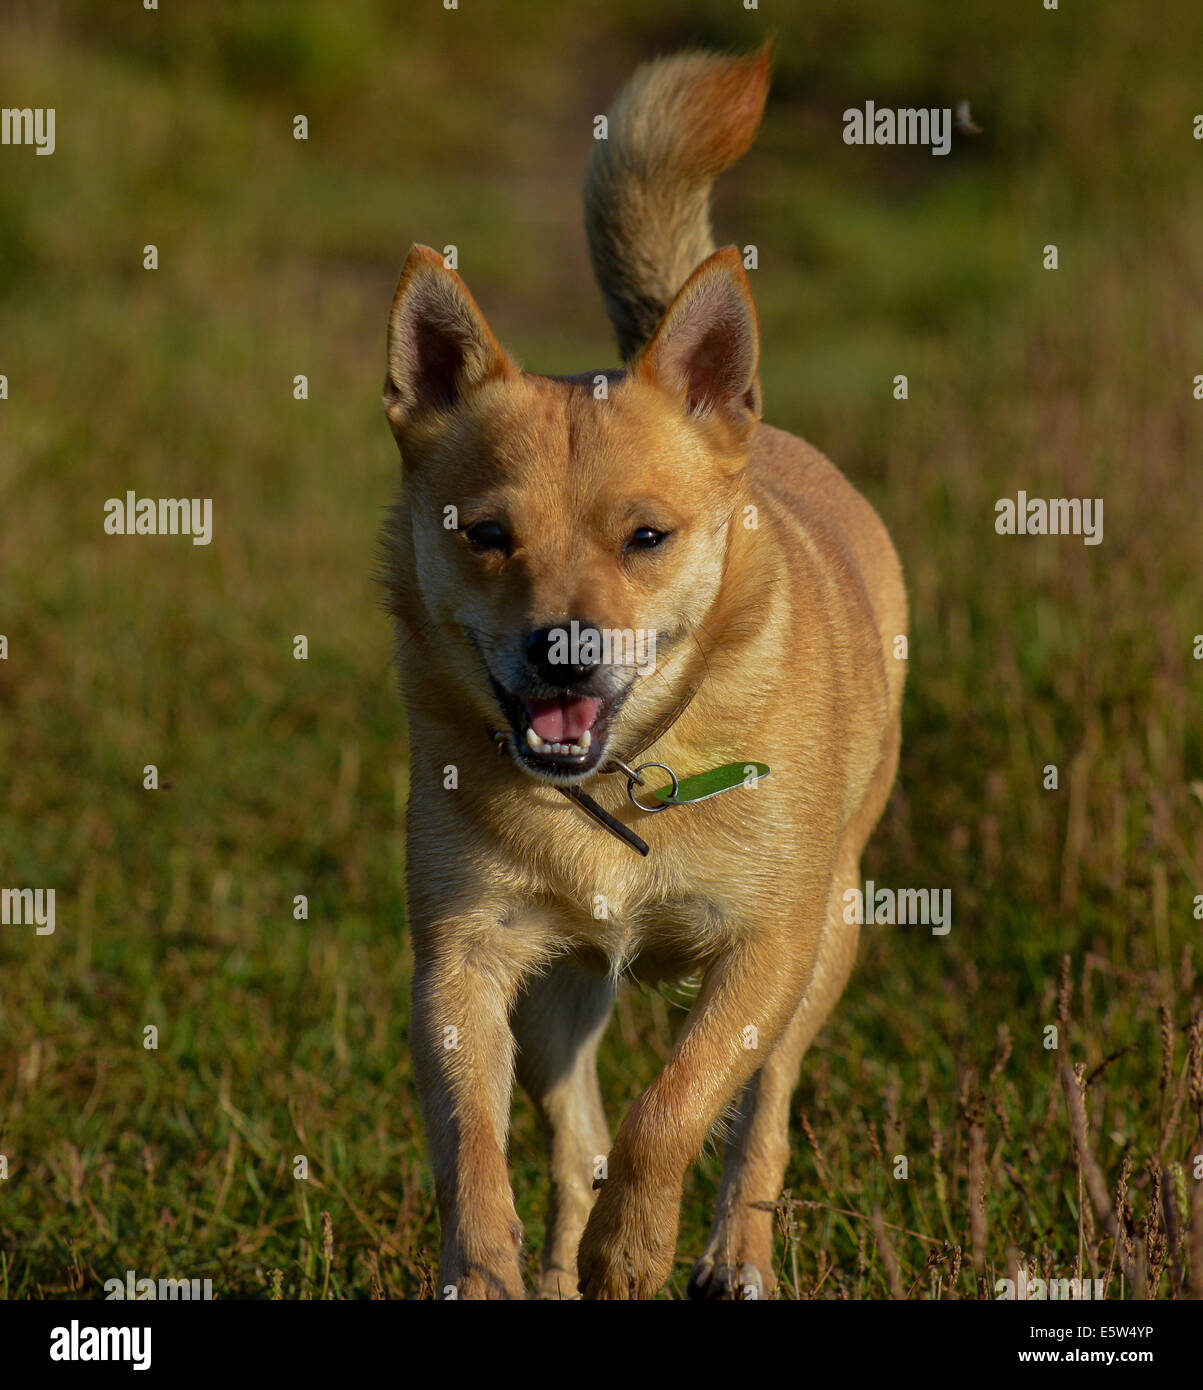 Small dog in countryside Stock Photo